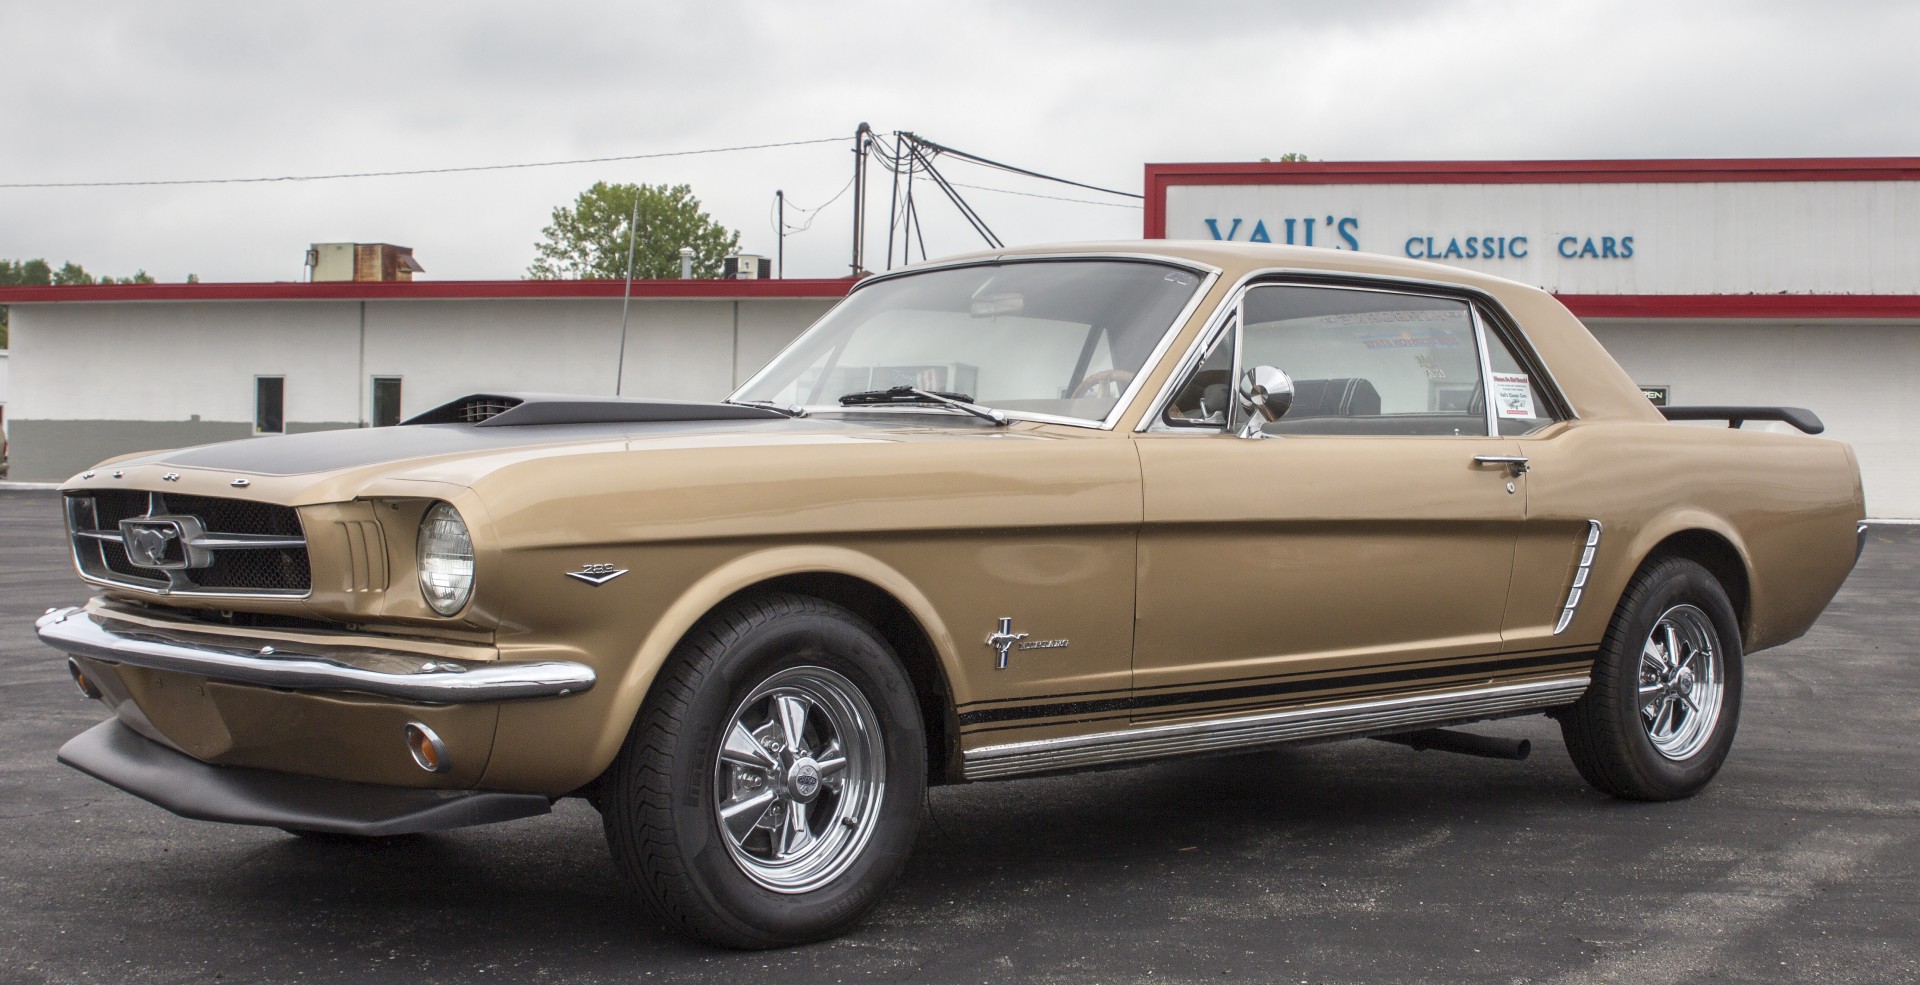 Ford,  Mustangas,  Ford & Nbsp,  Mustang,  1965,  289,  Automobiliai,  Automobiliai,  Klasikinis,  Klasikiniai & Nbsp